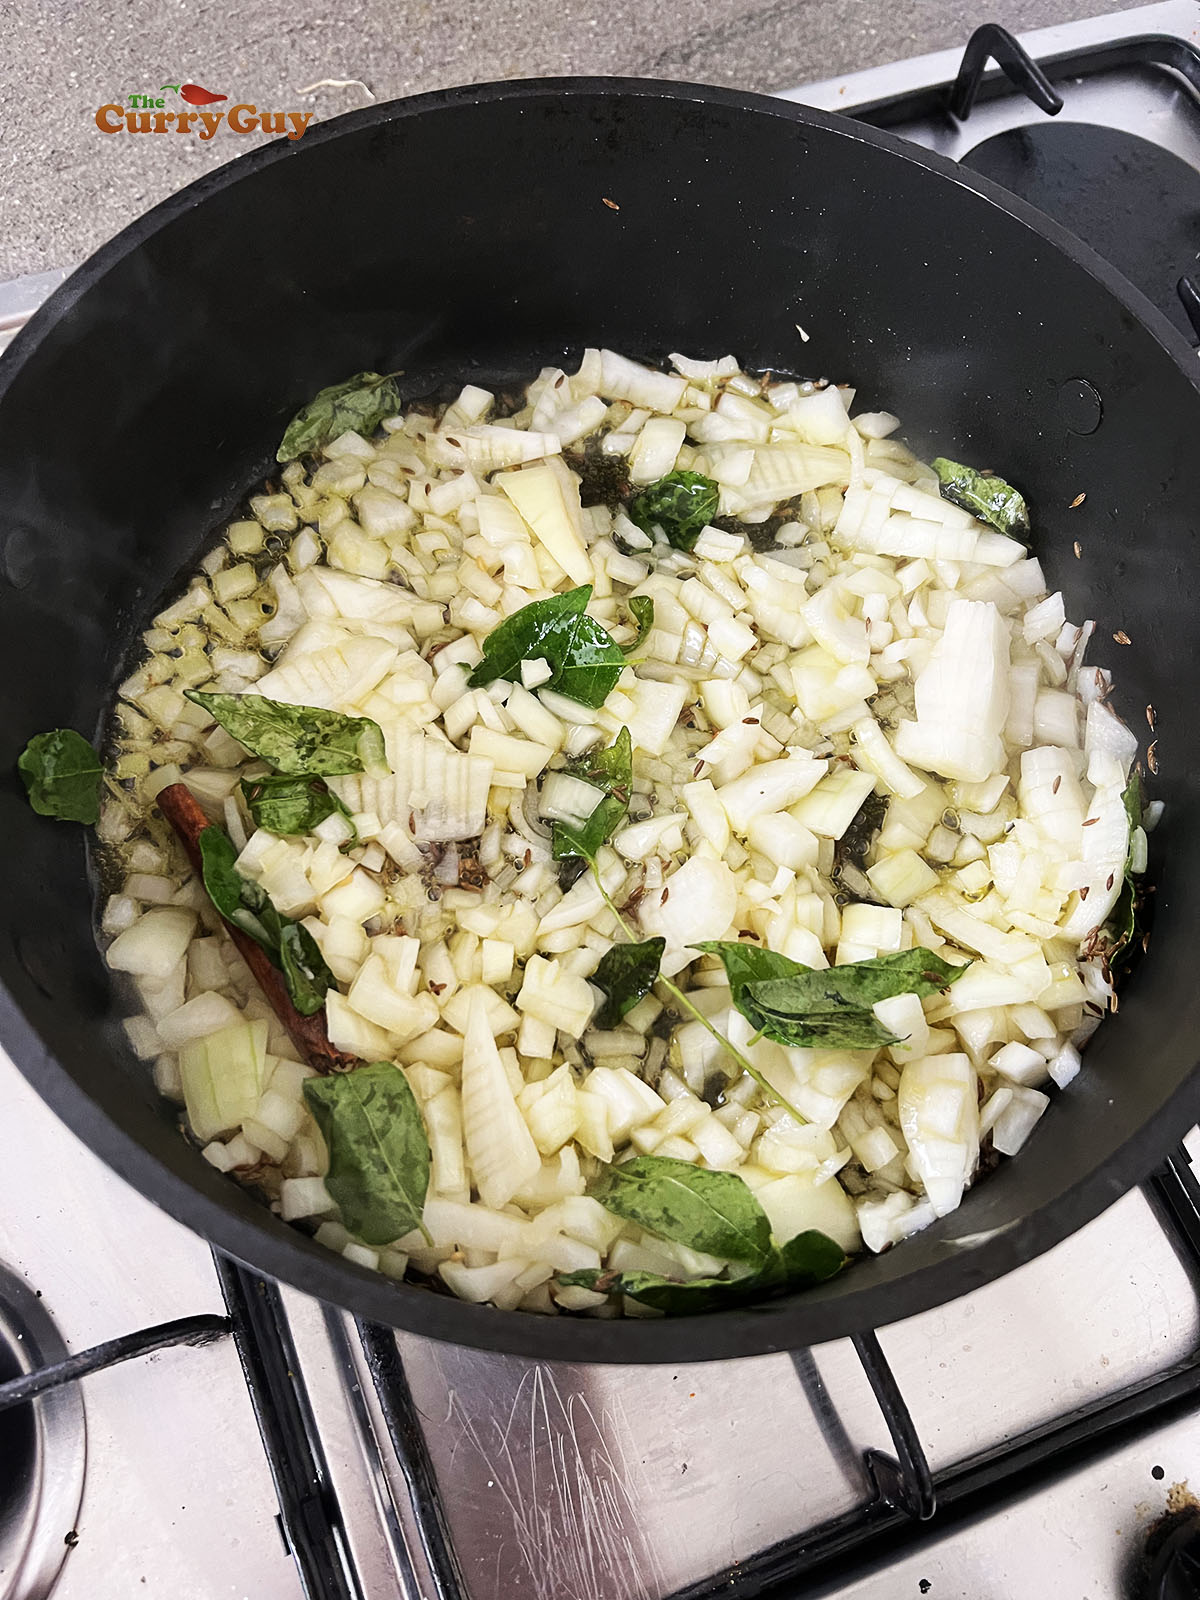 Adding onions to the pan